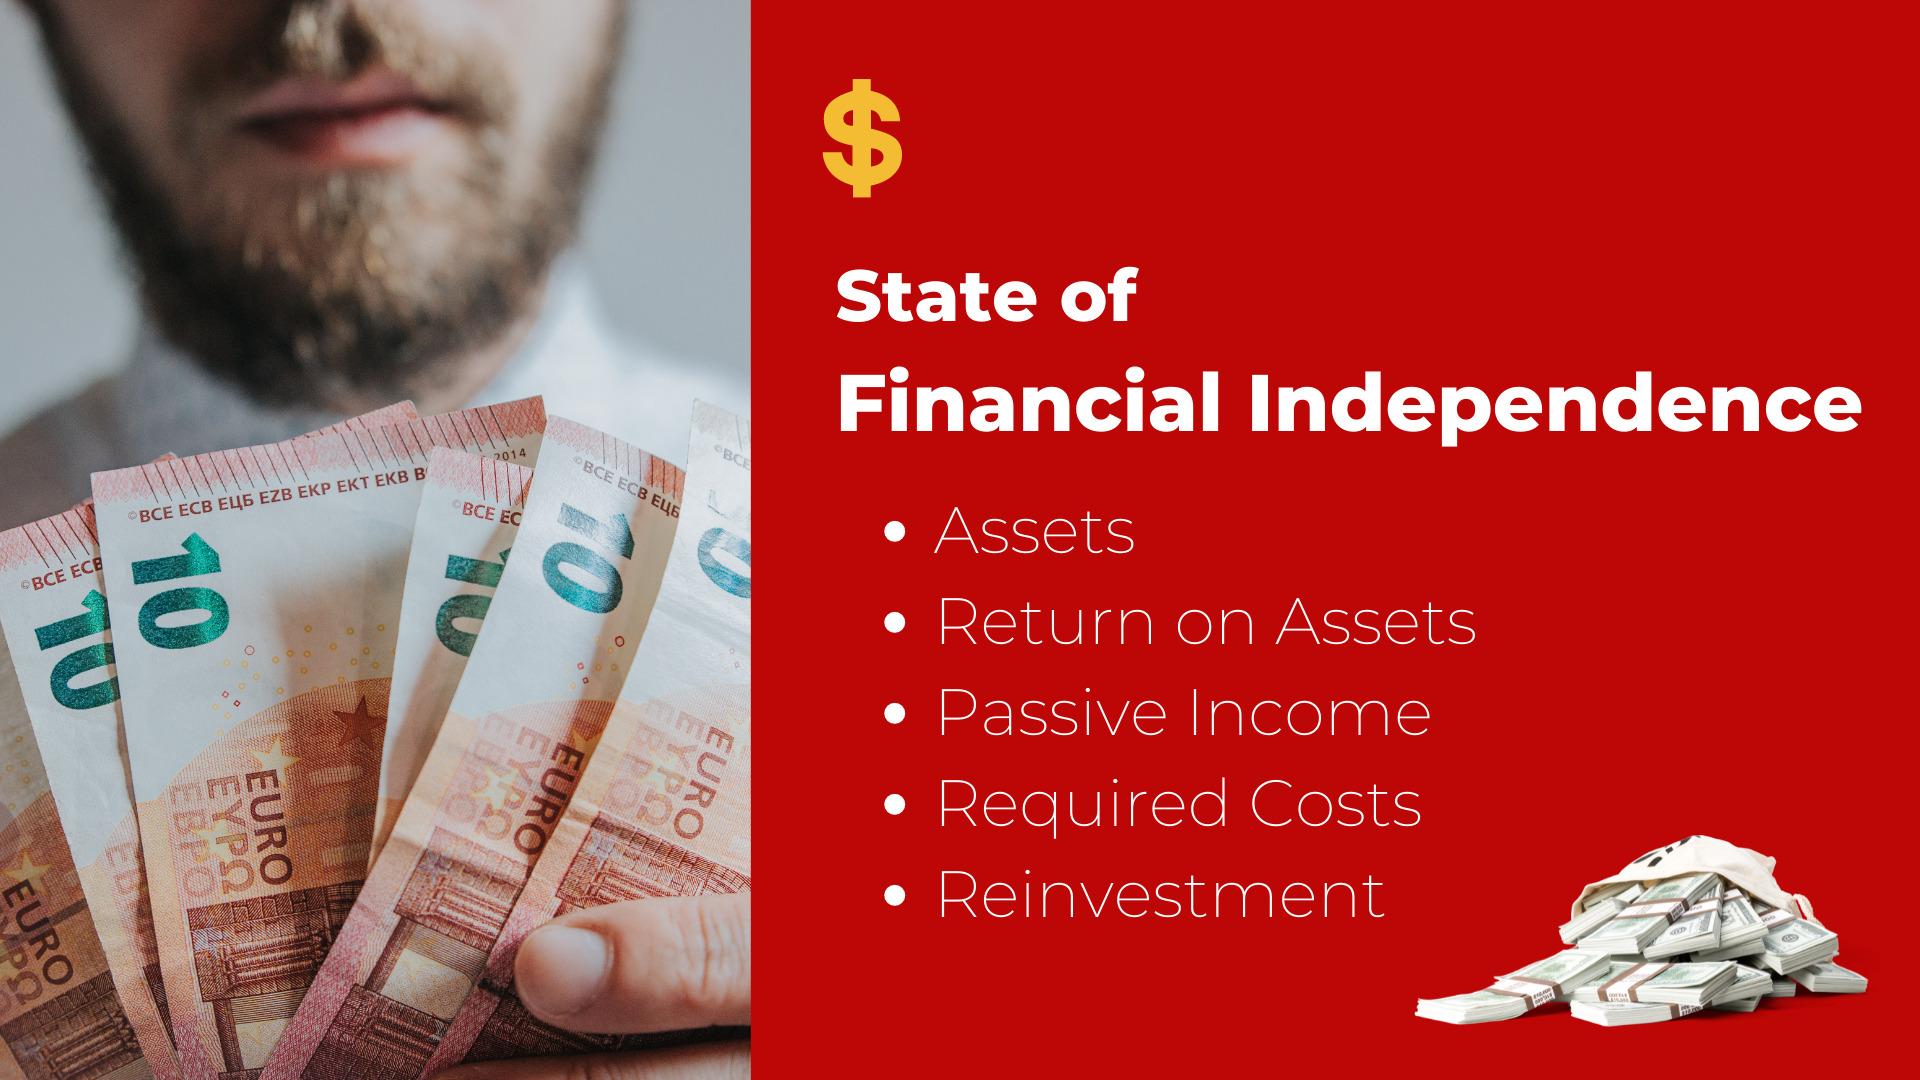 How to be financially independent in India